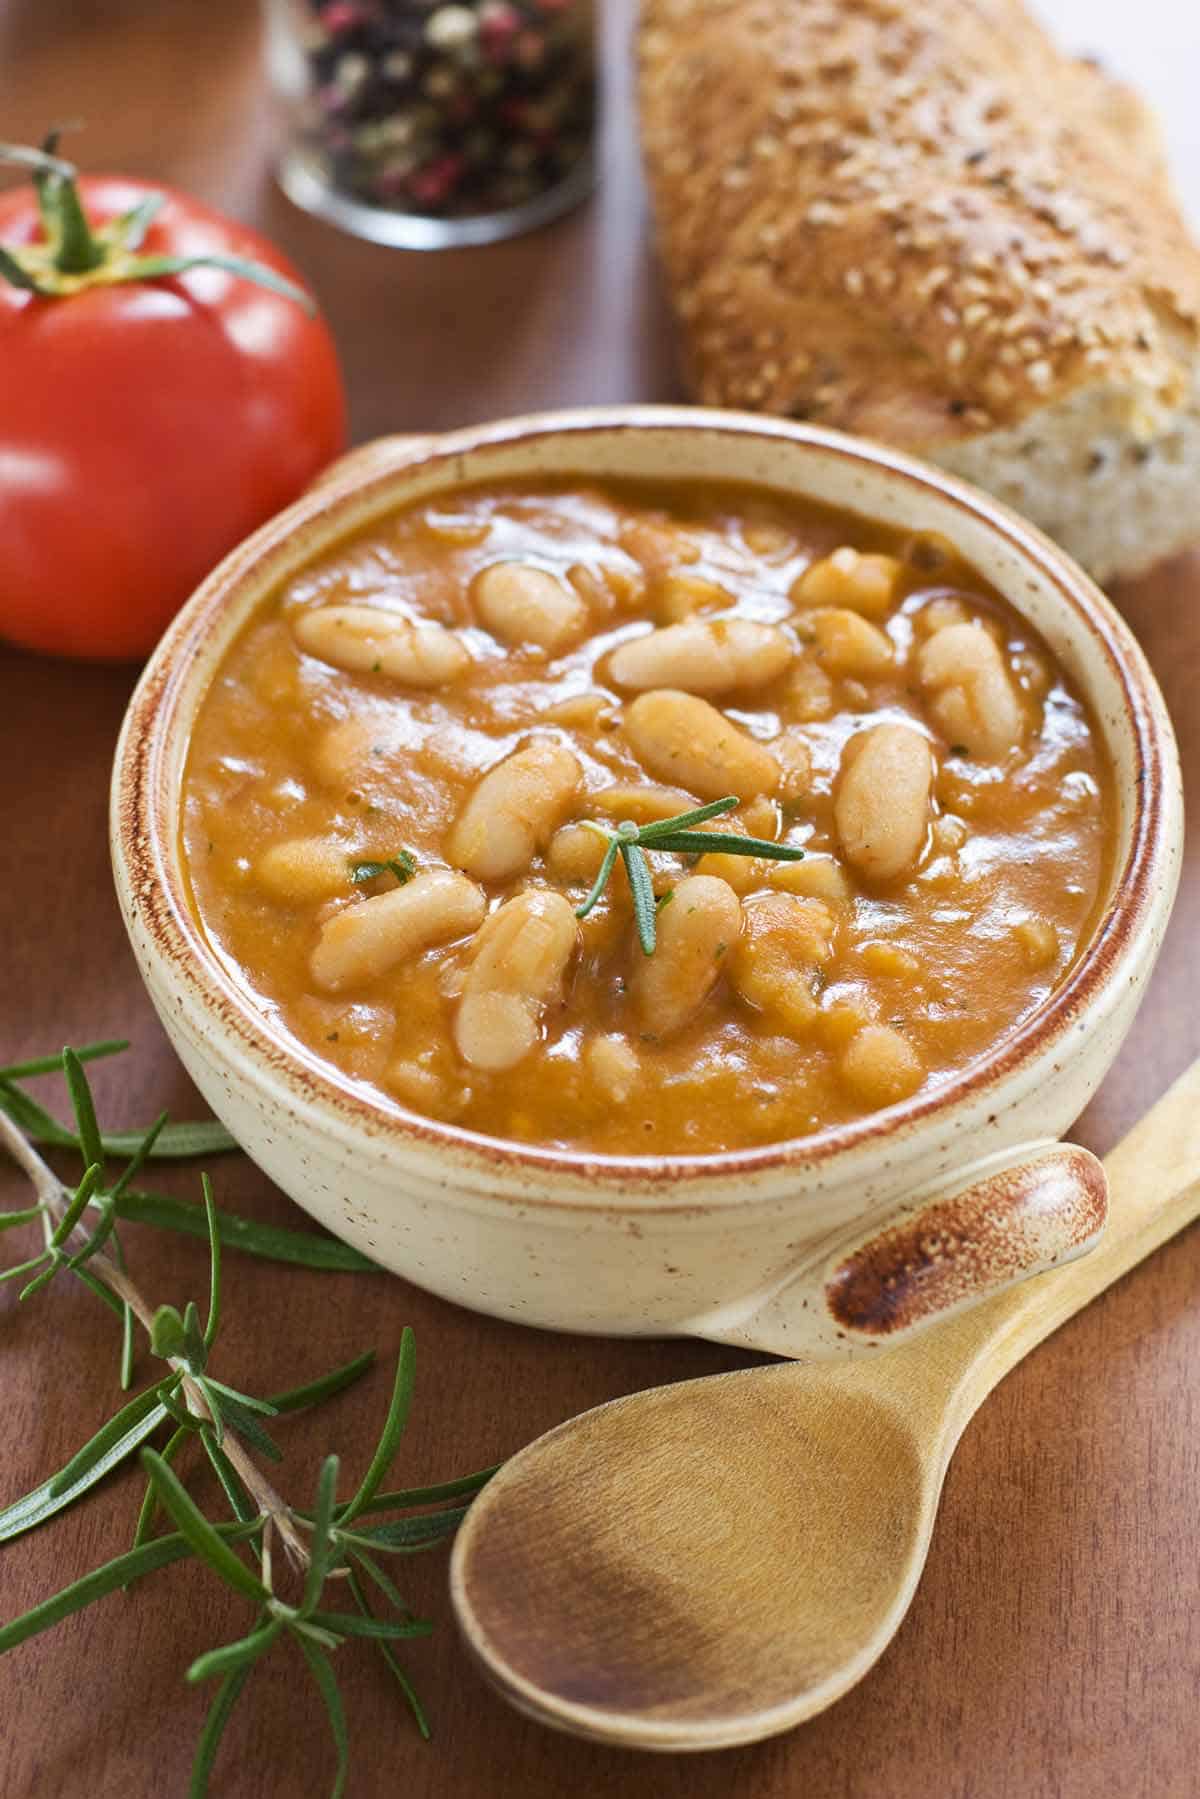 Bowl of navy bean soup garnished with rosemary. A tomato, wooden spoon, and crusty bread are in the background.